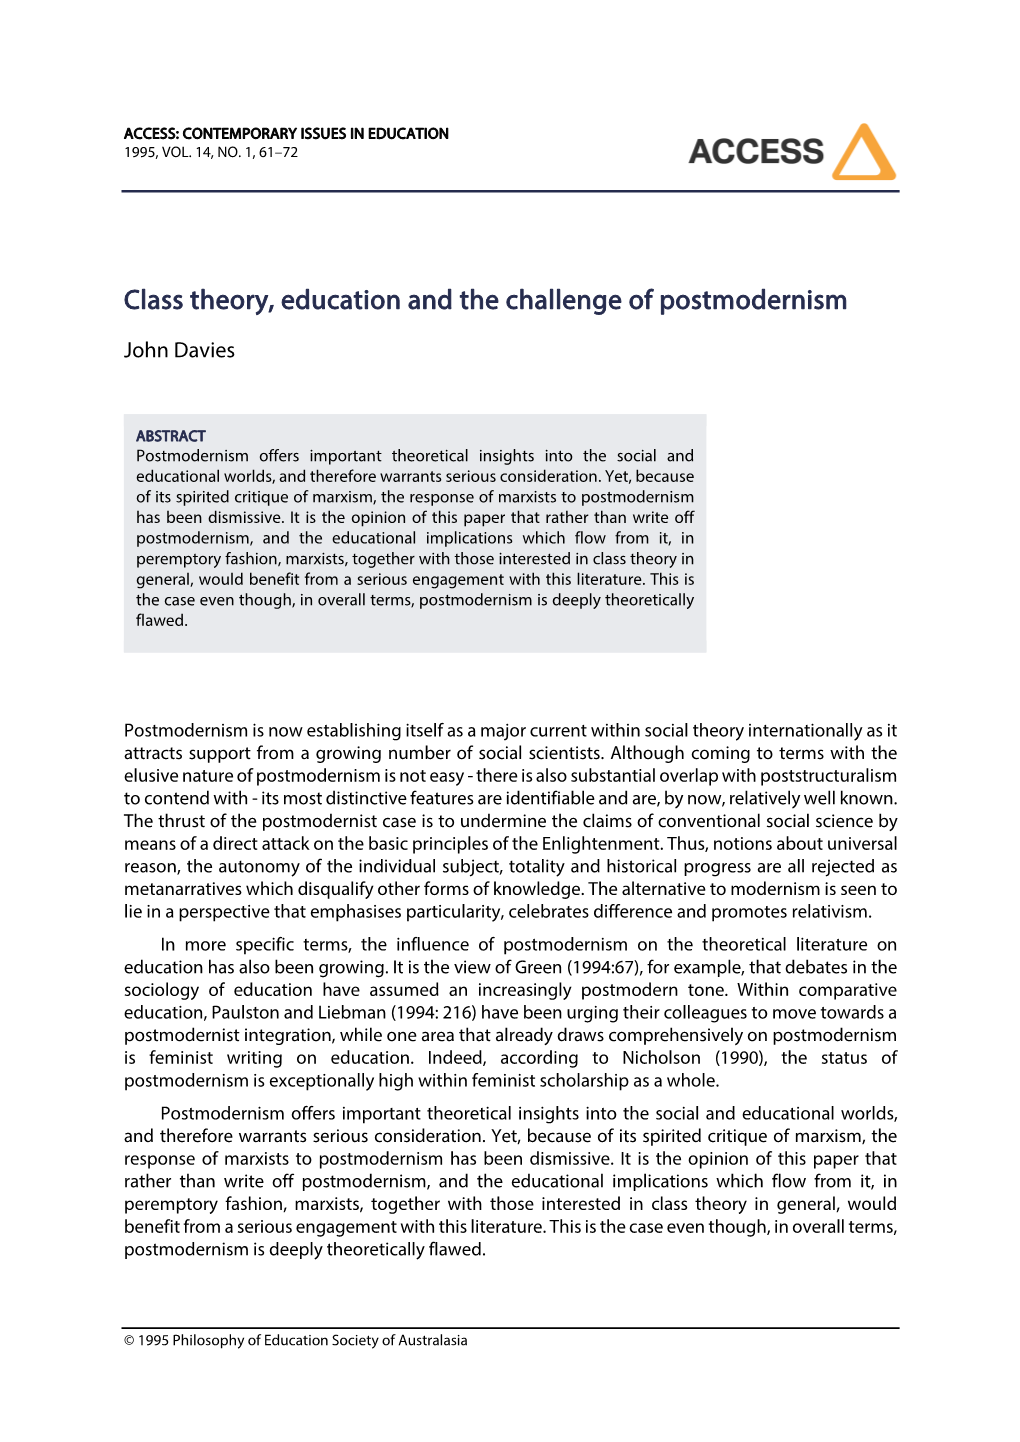 Class Theory, Education and the Challenge of Postmodernism